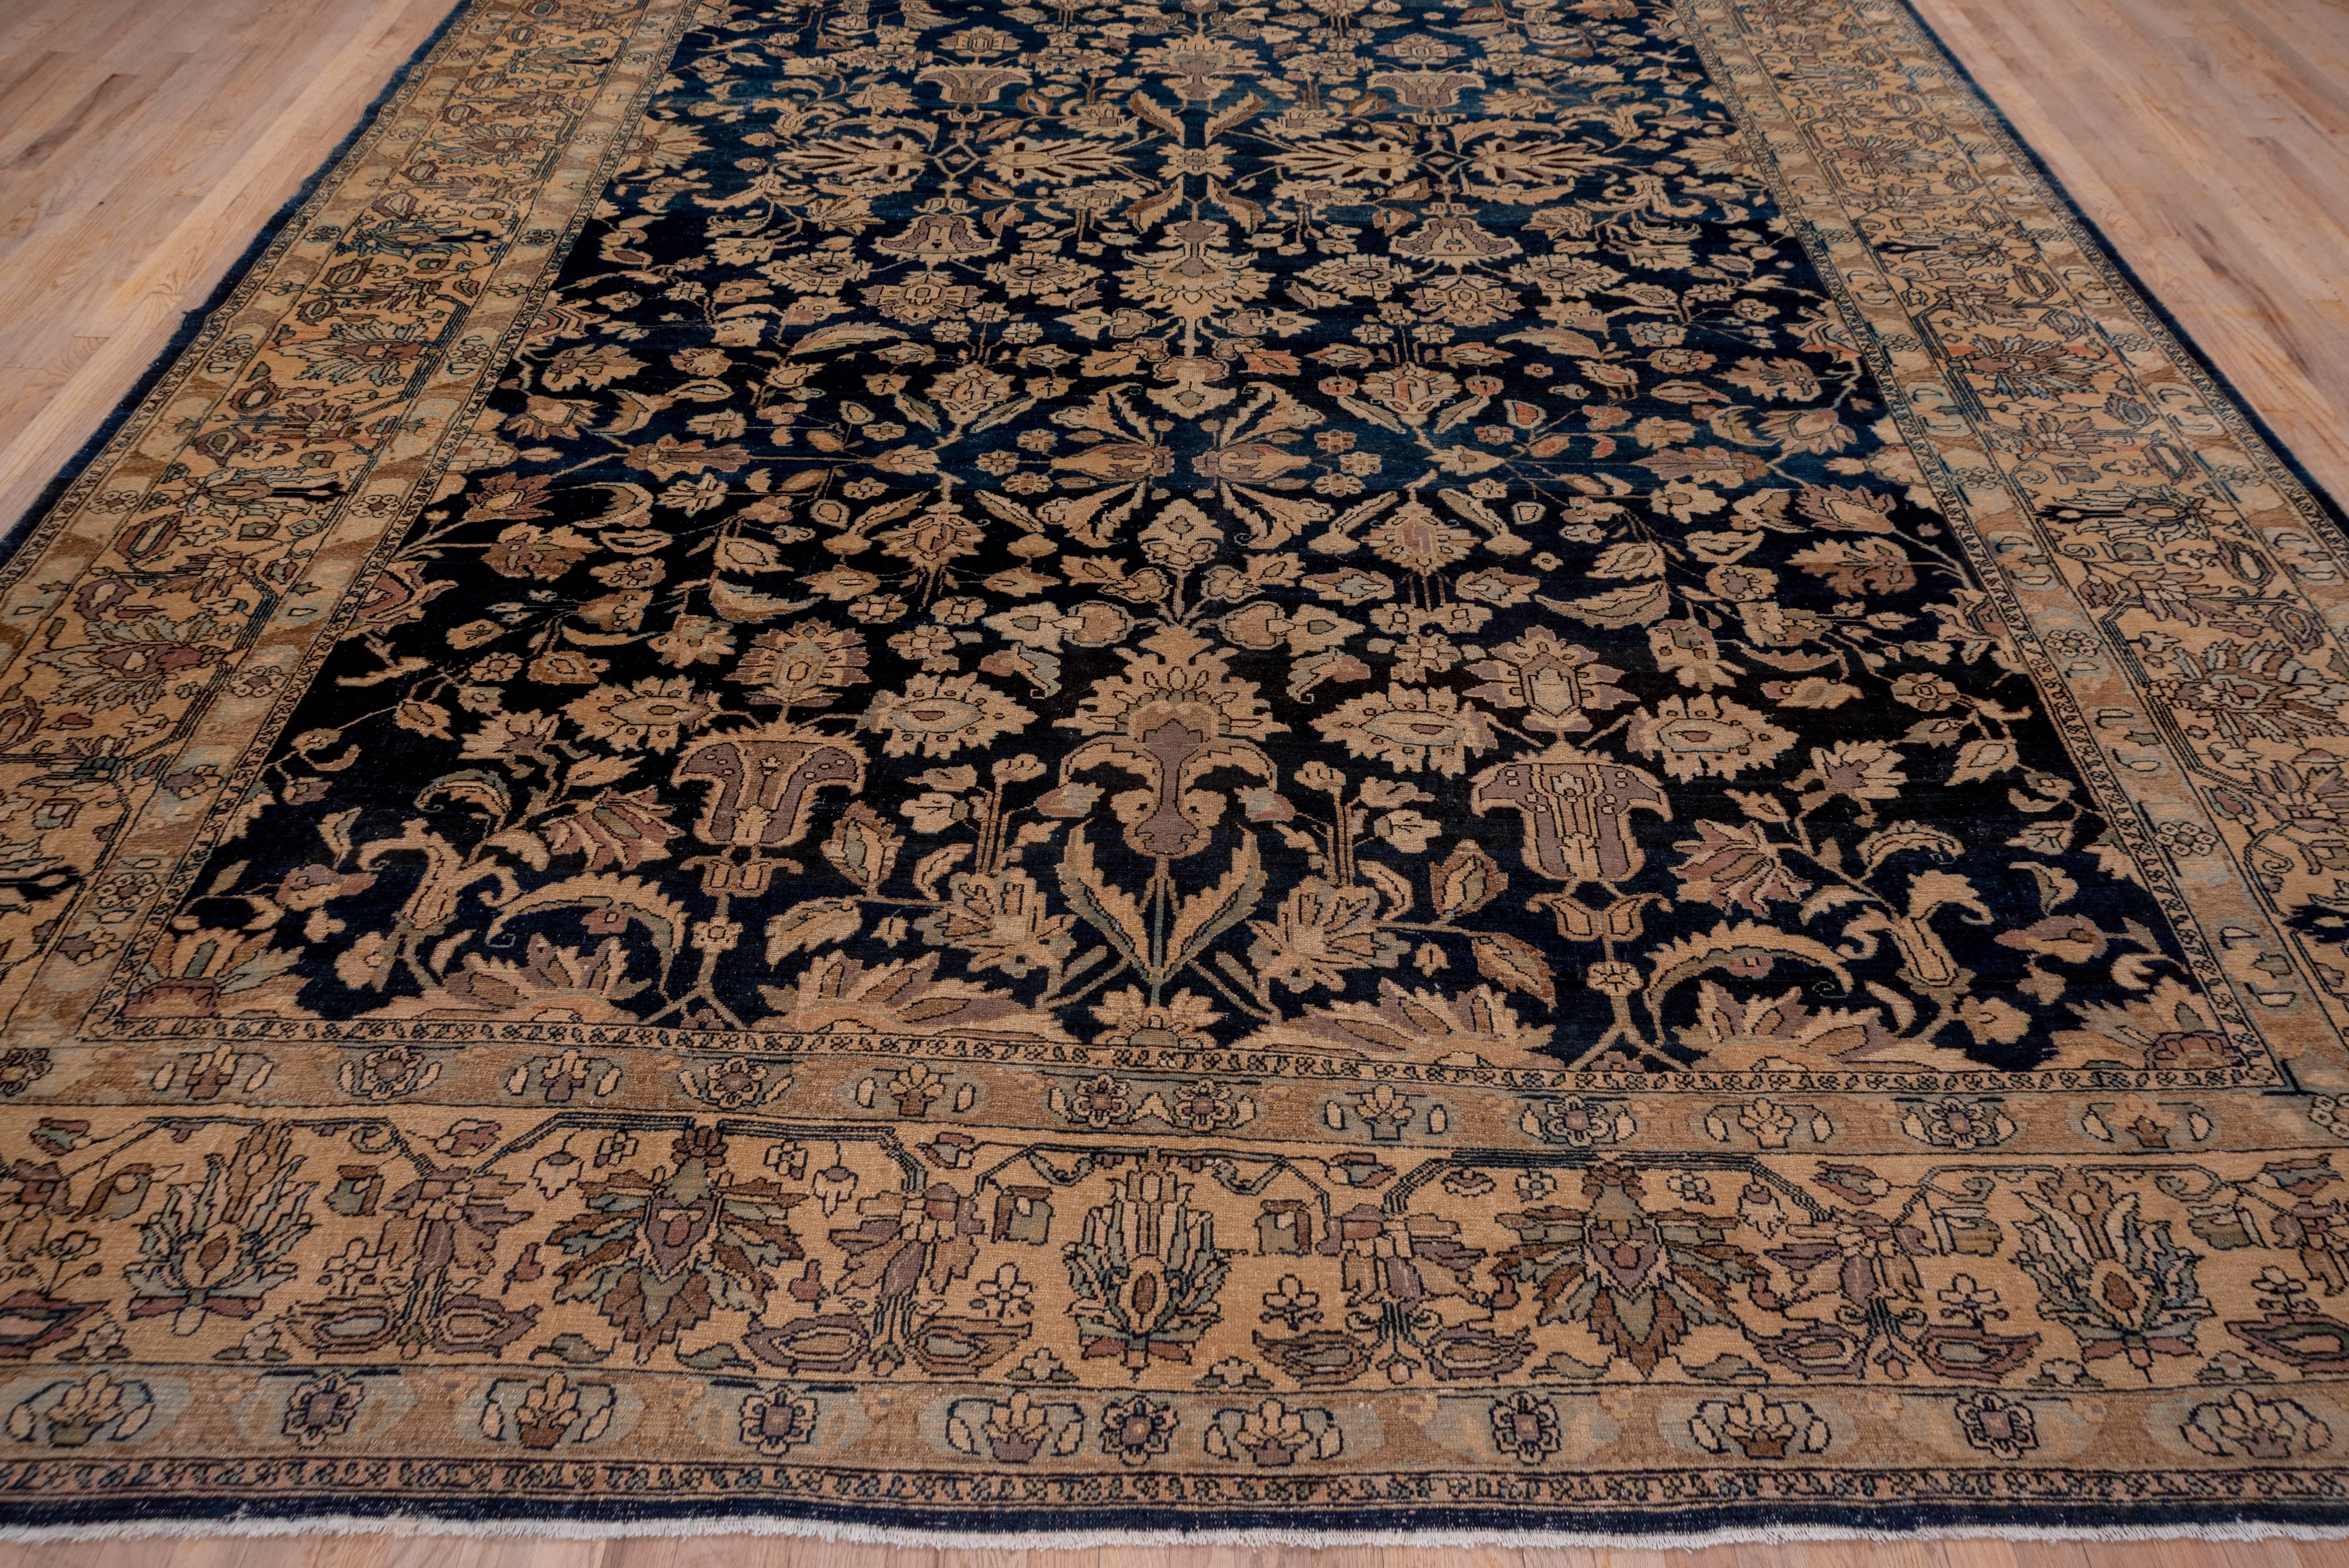 This west Persian town carpet shows a navy blue ground with an all-over escutcheon, palmette, blossom and leaf pattern. The beige border displays two varieties of in and out palmettes sprouting small flowers. The light toned border system is a nice